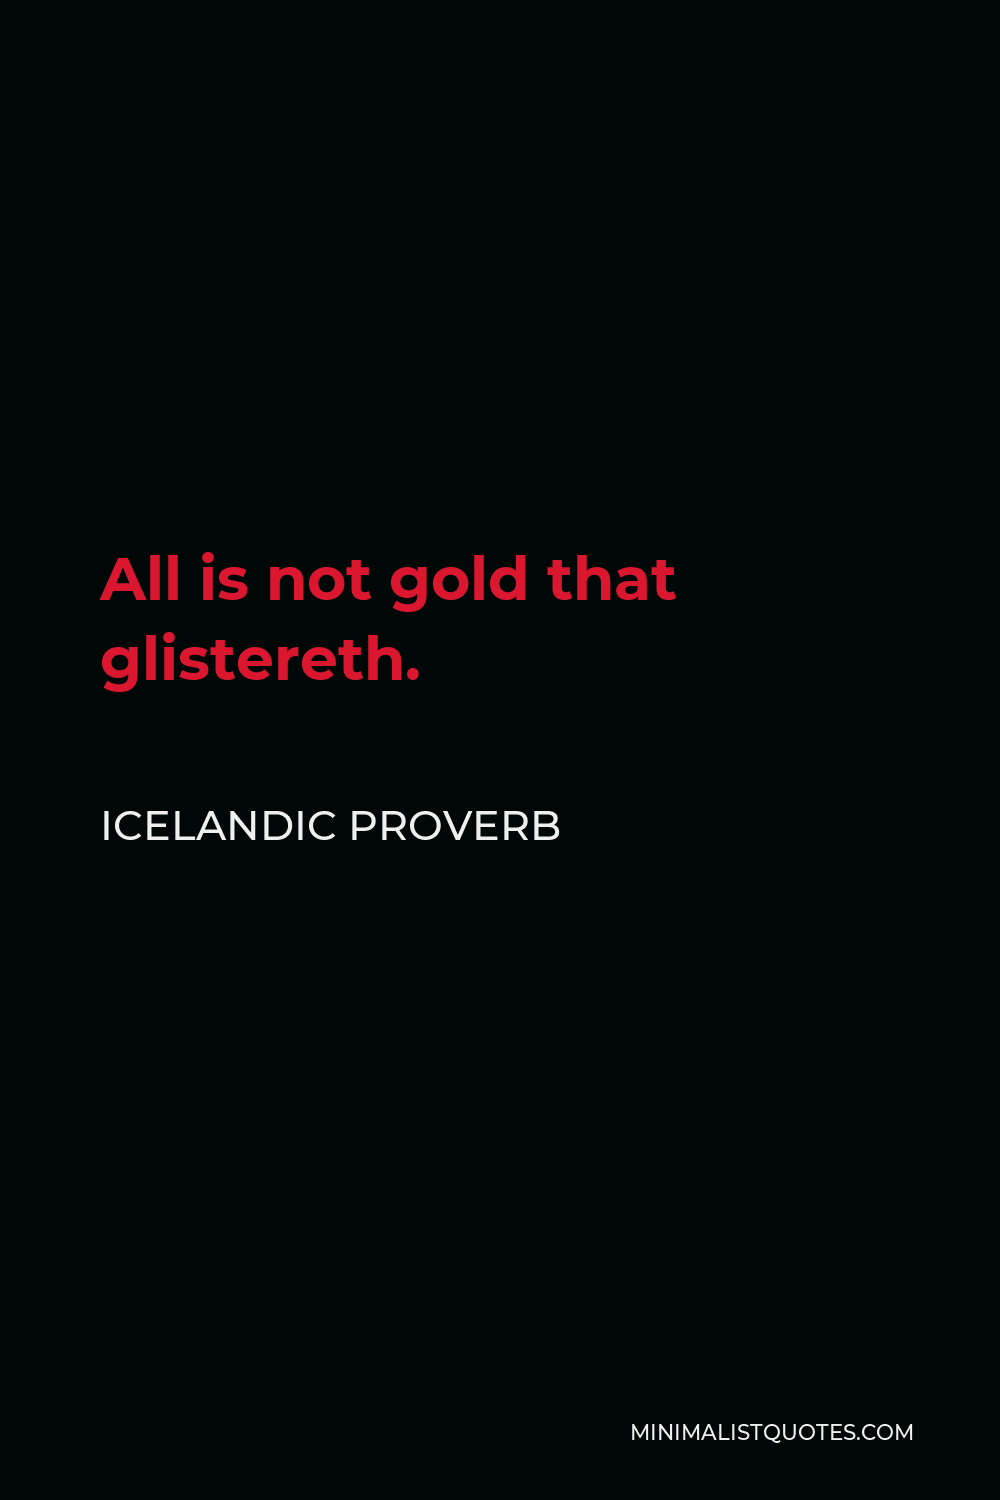 Icelandic Proverb Quote - All is not gold that glistereth.